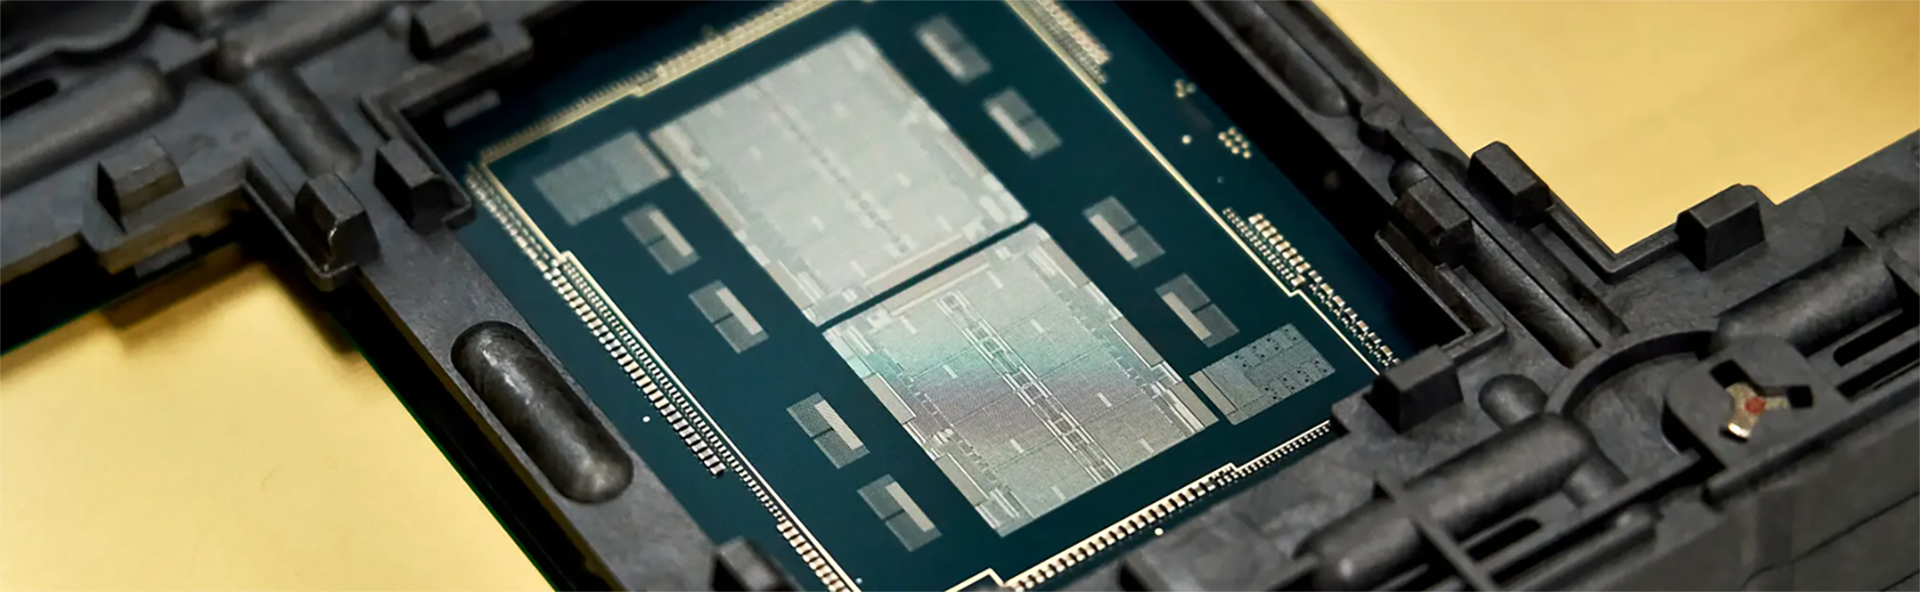 image of a microprocessor